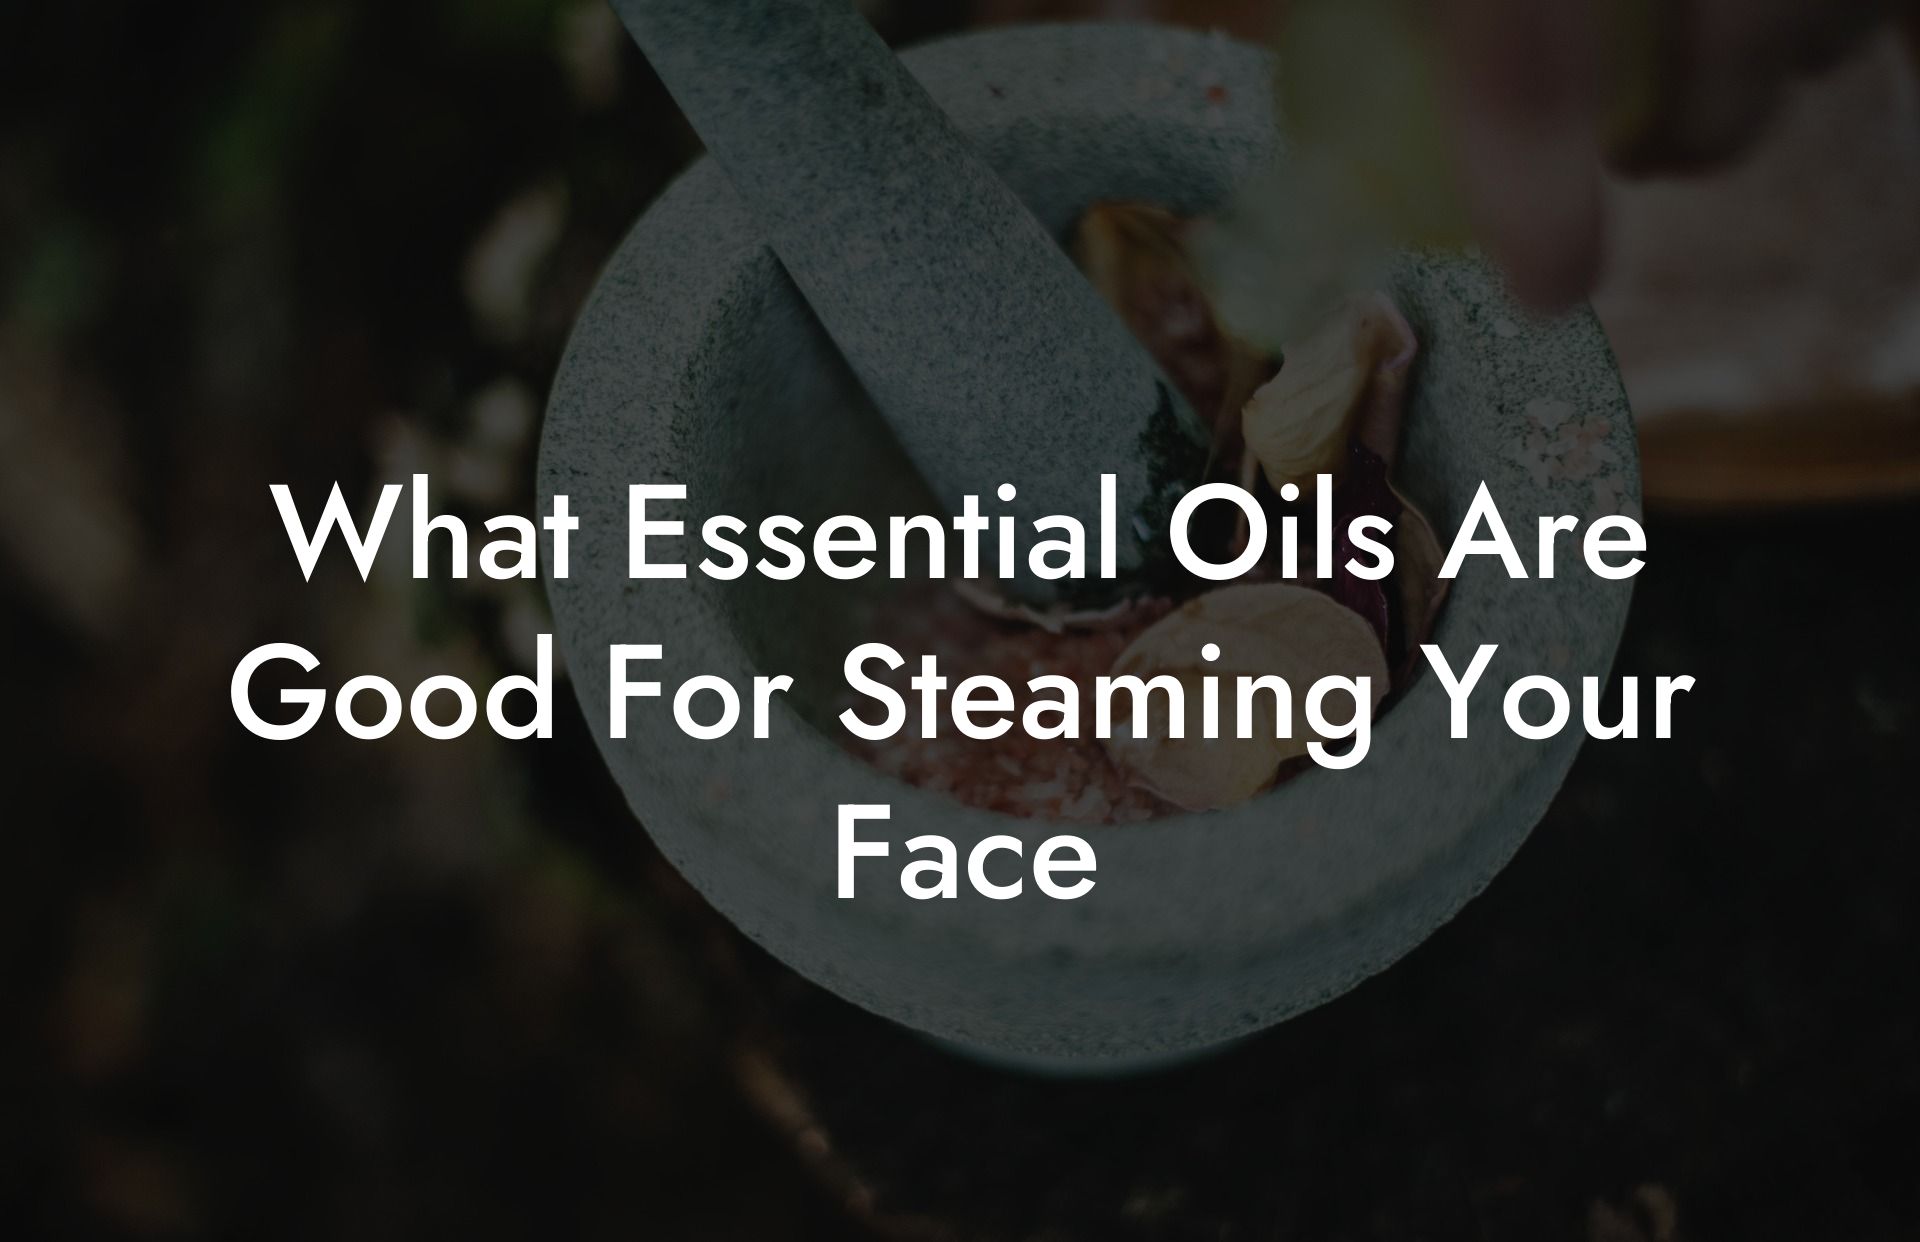 What Essential Oils Are Good For Steaming Your Face